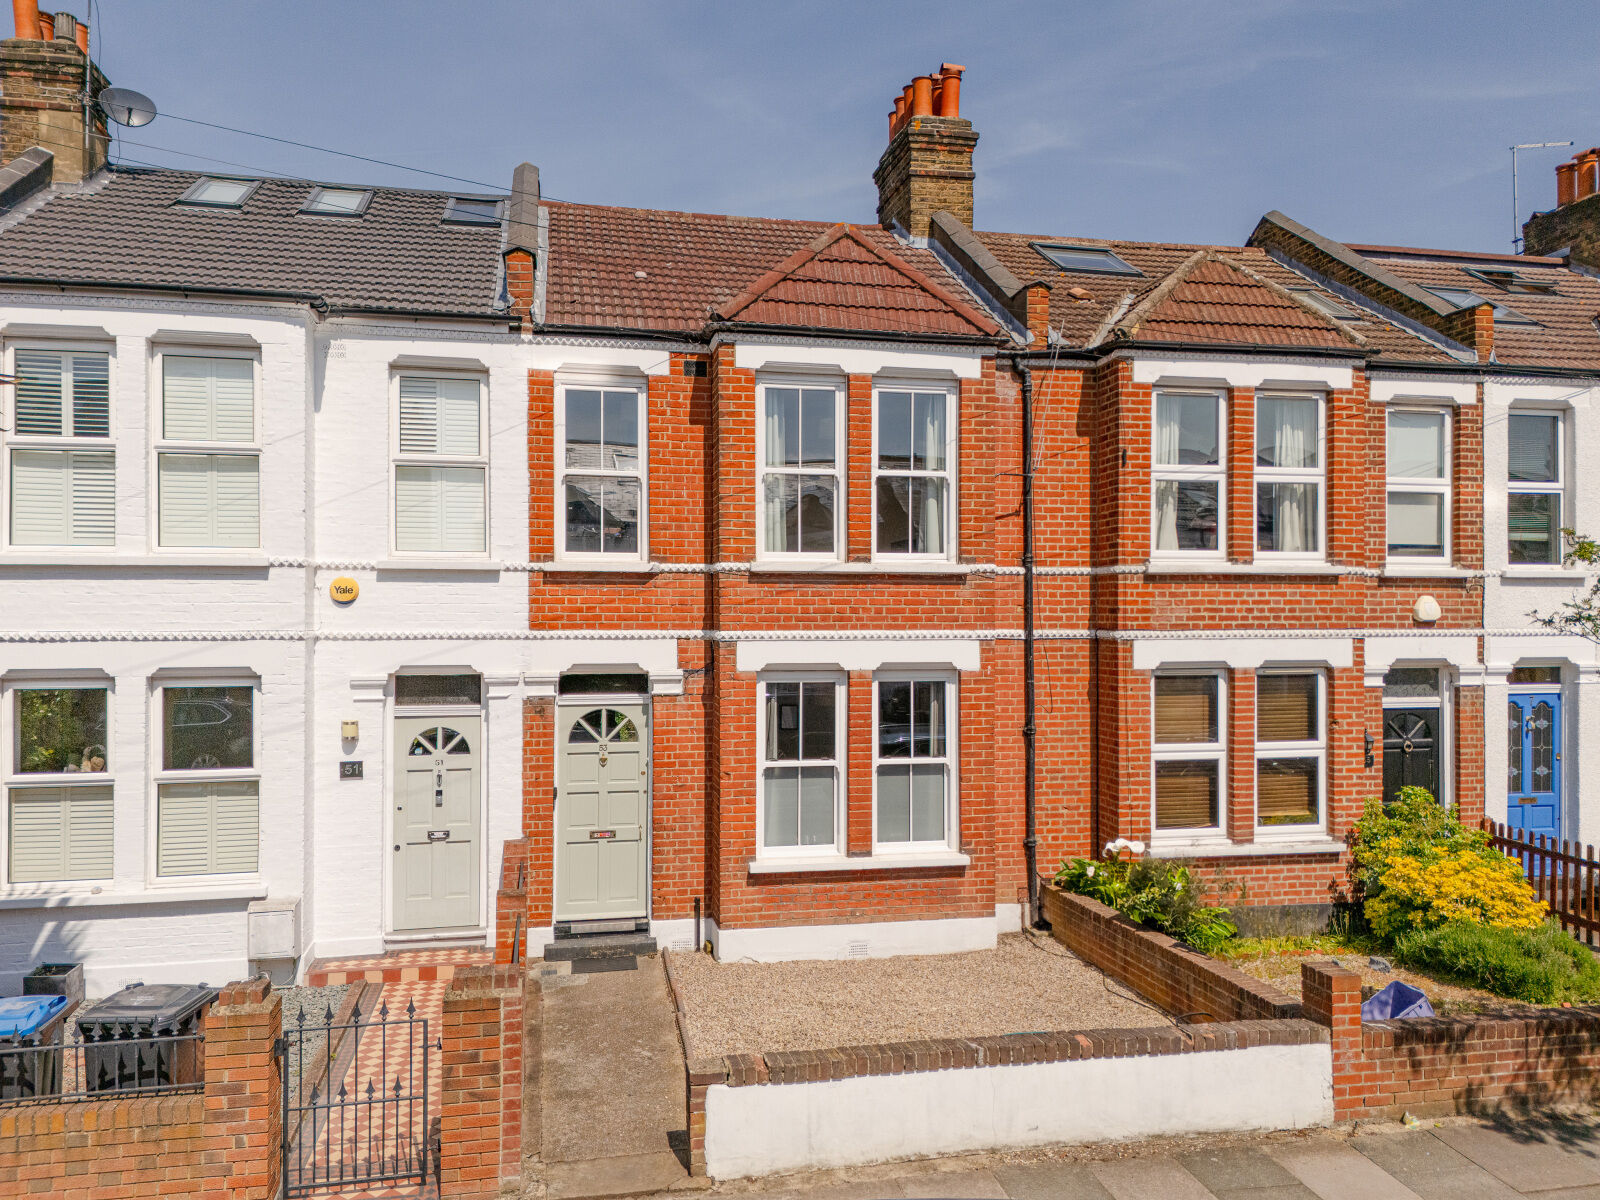 3 bedroom mid terraced house for sale Effra Road, Wimbledon, London, SW19, main image